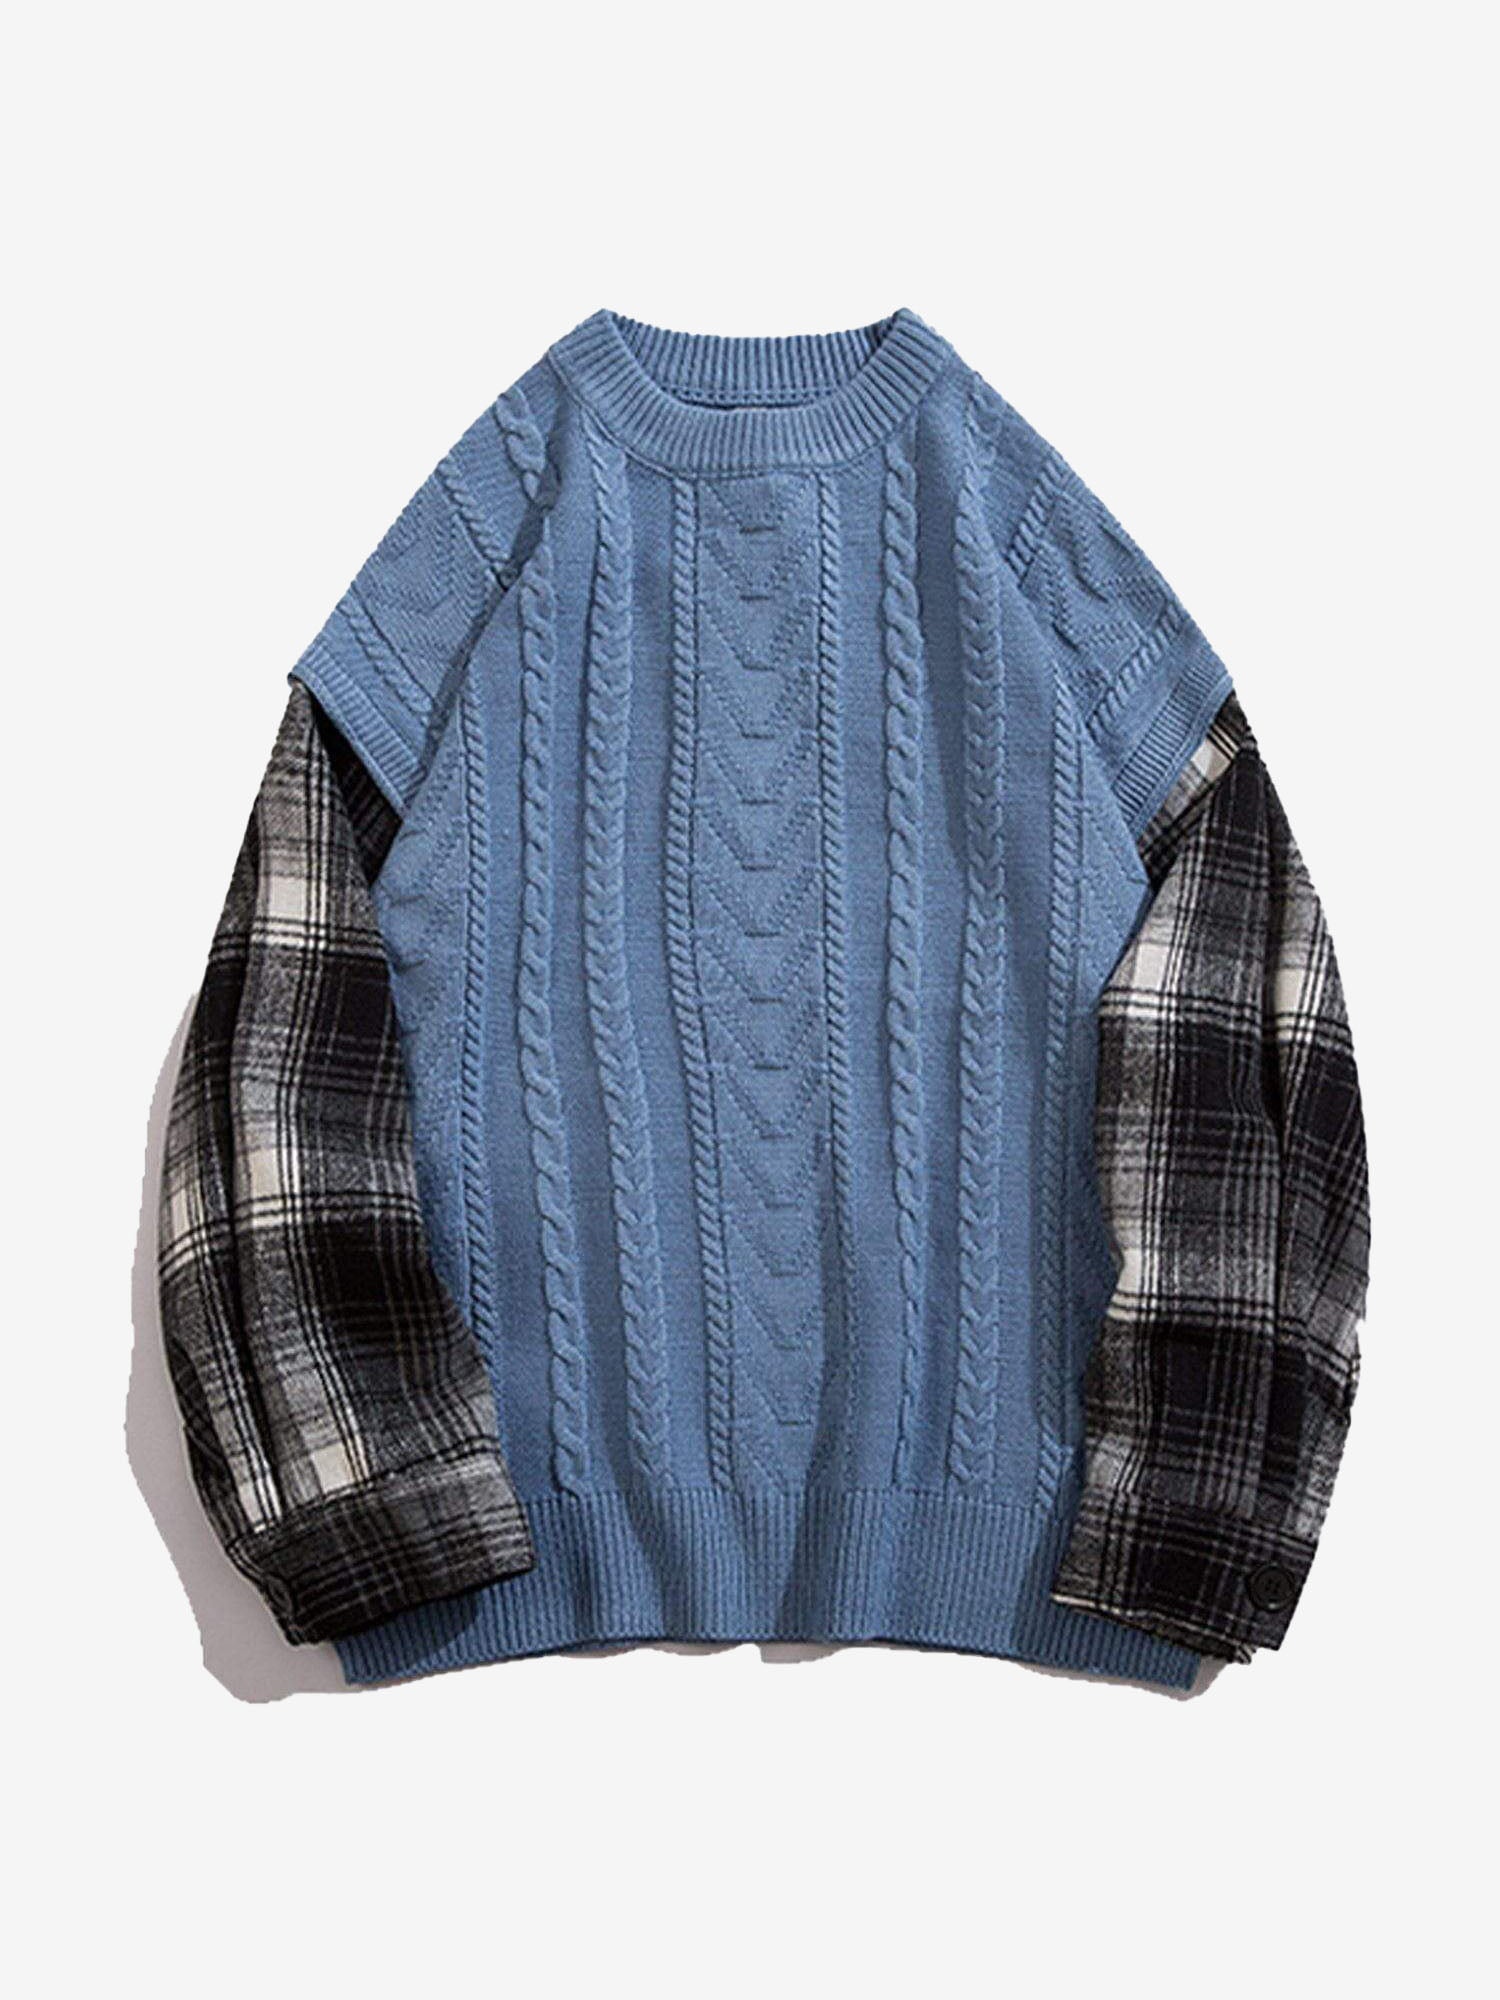 JUSTNOTAG Vintage Plaid Patchwork Knitted Sweater